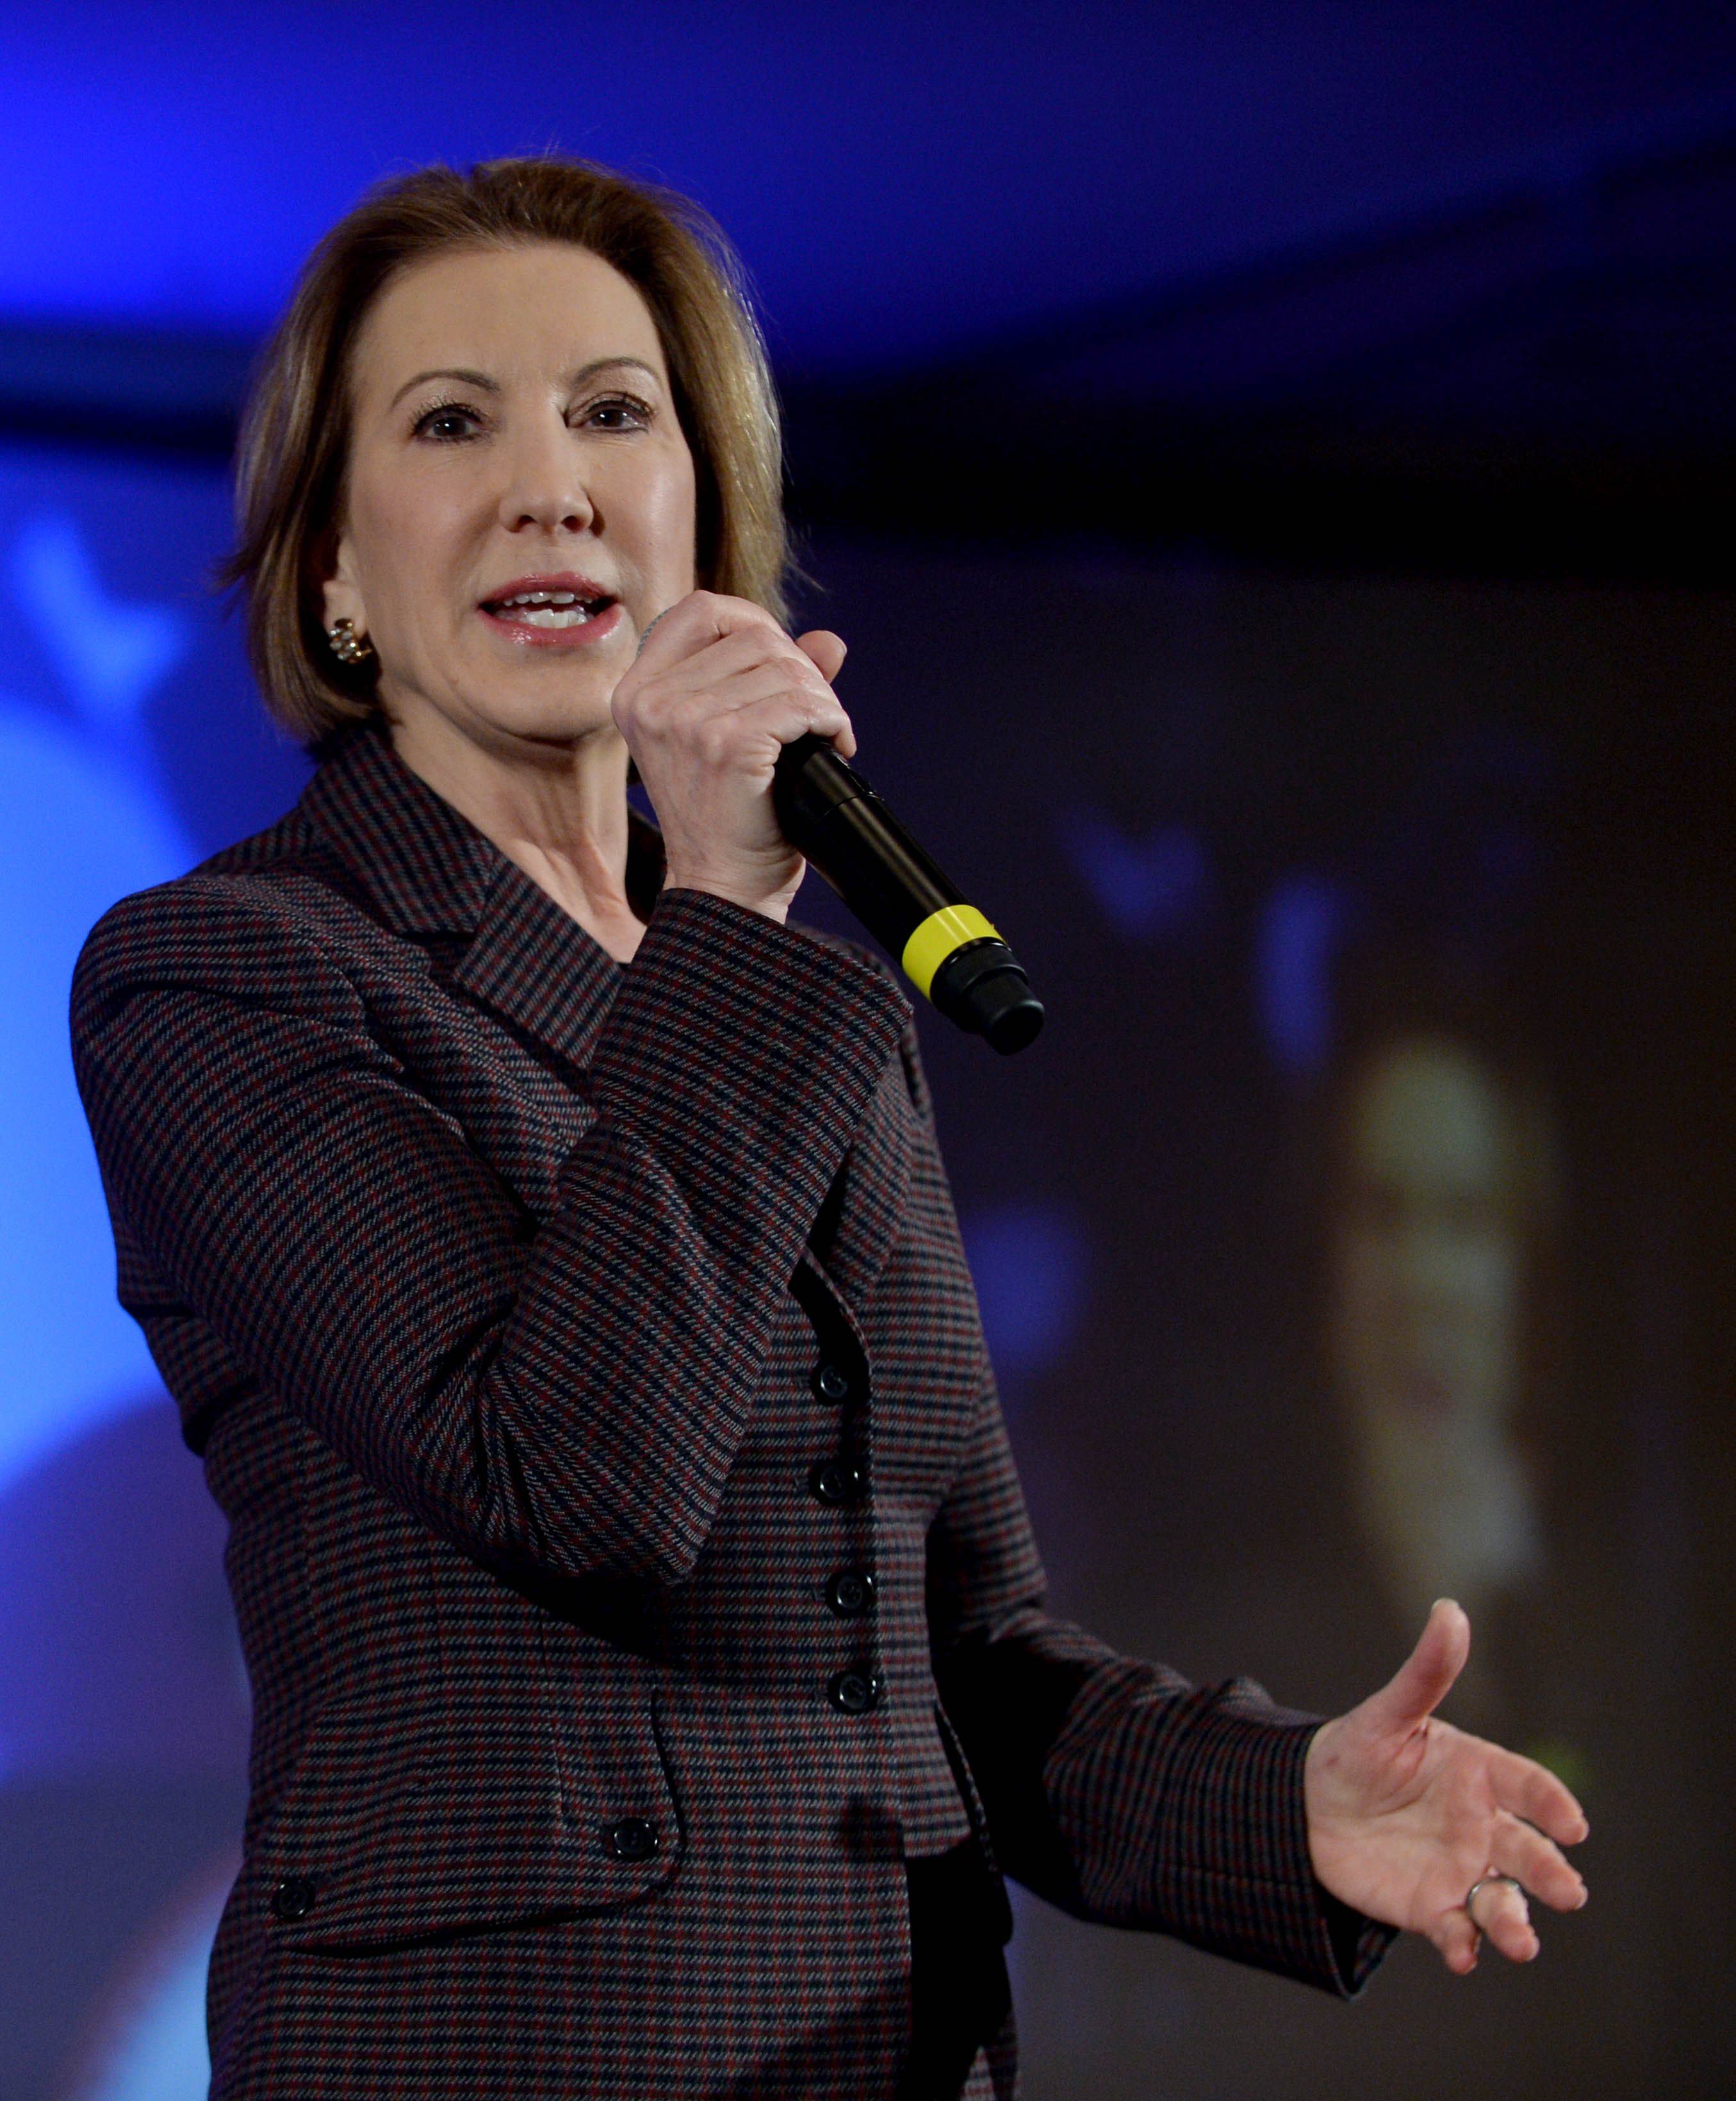 Republican presidential candidate Carly Fiorina speaks at the NHGOP First In The Nation Town Hall in Nashua, N.H., on Jan. 23, 2016. (Darren McCollester—Getty Images)